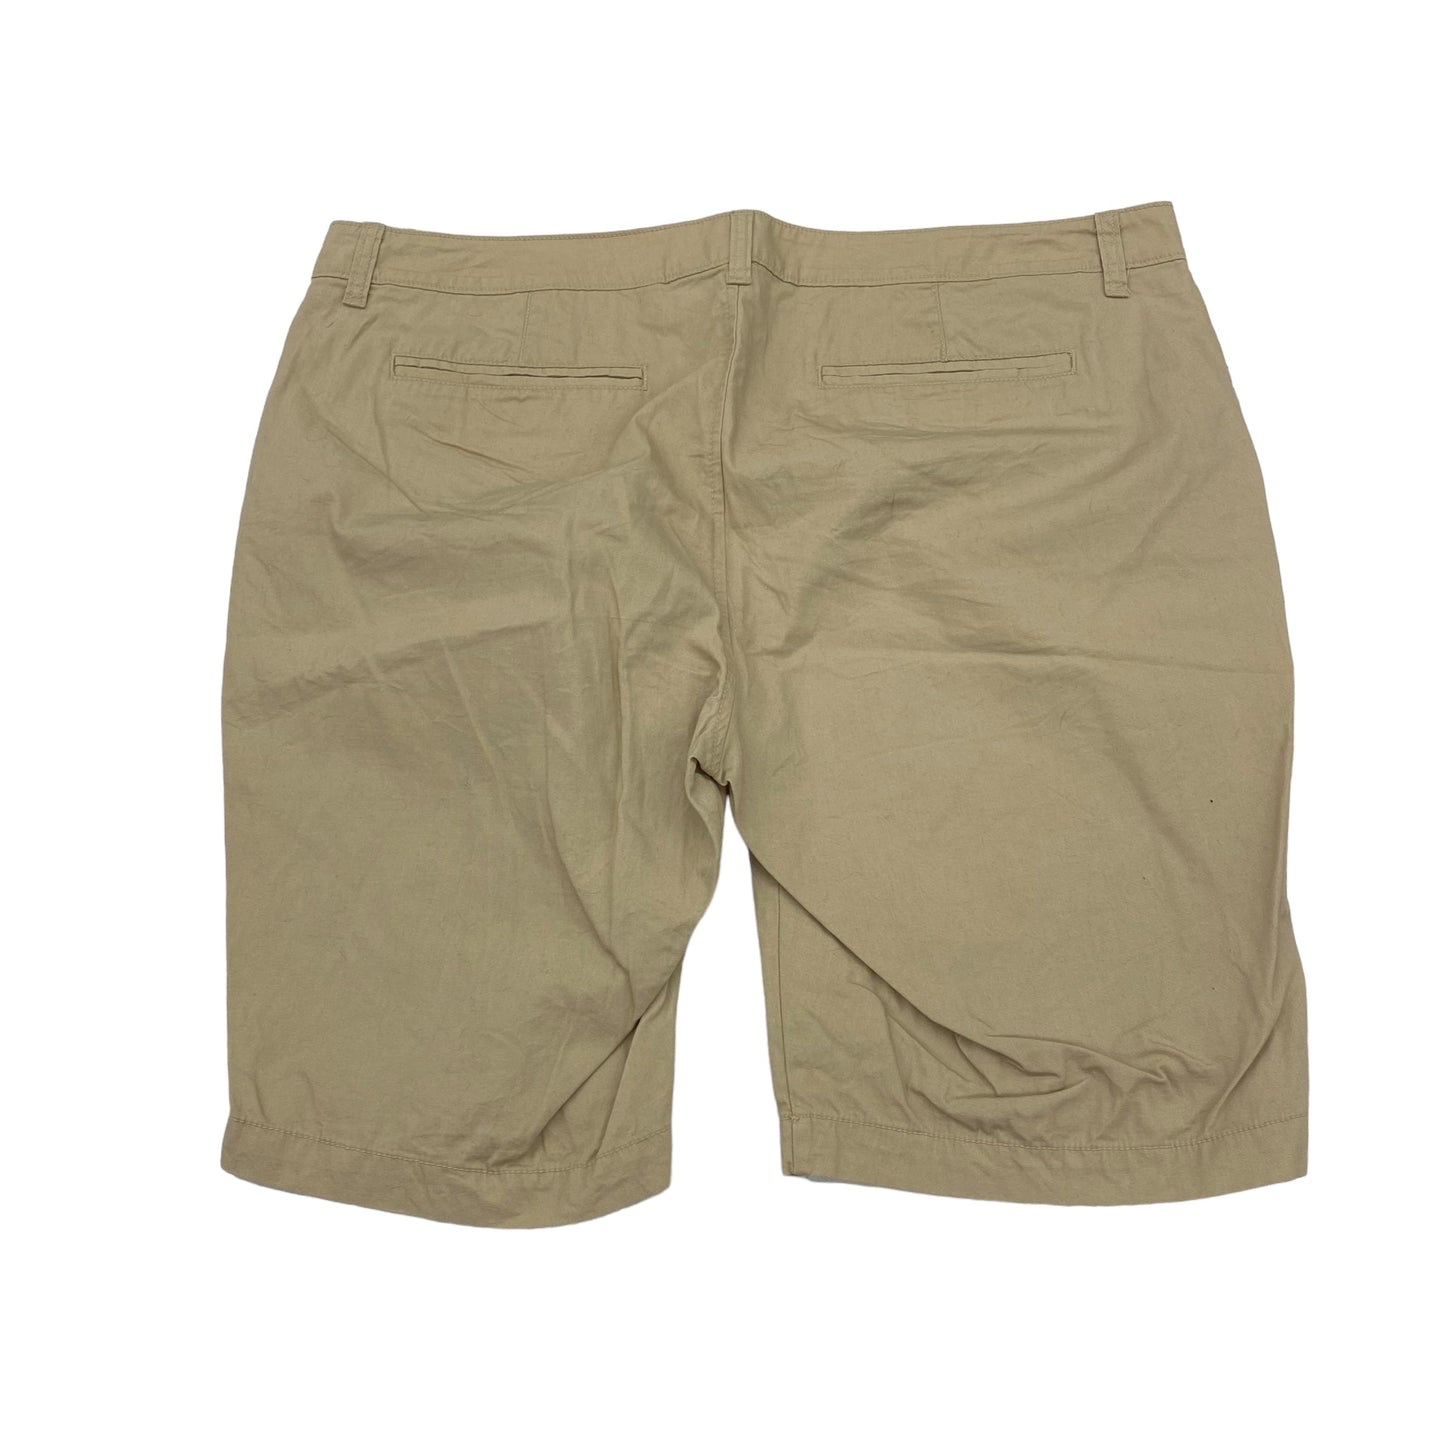 TAN SHORTS by OLD NAVY Size:16